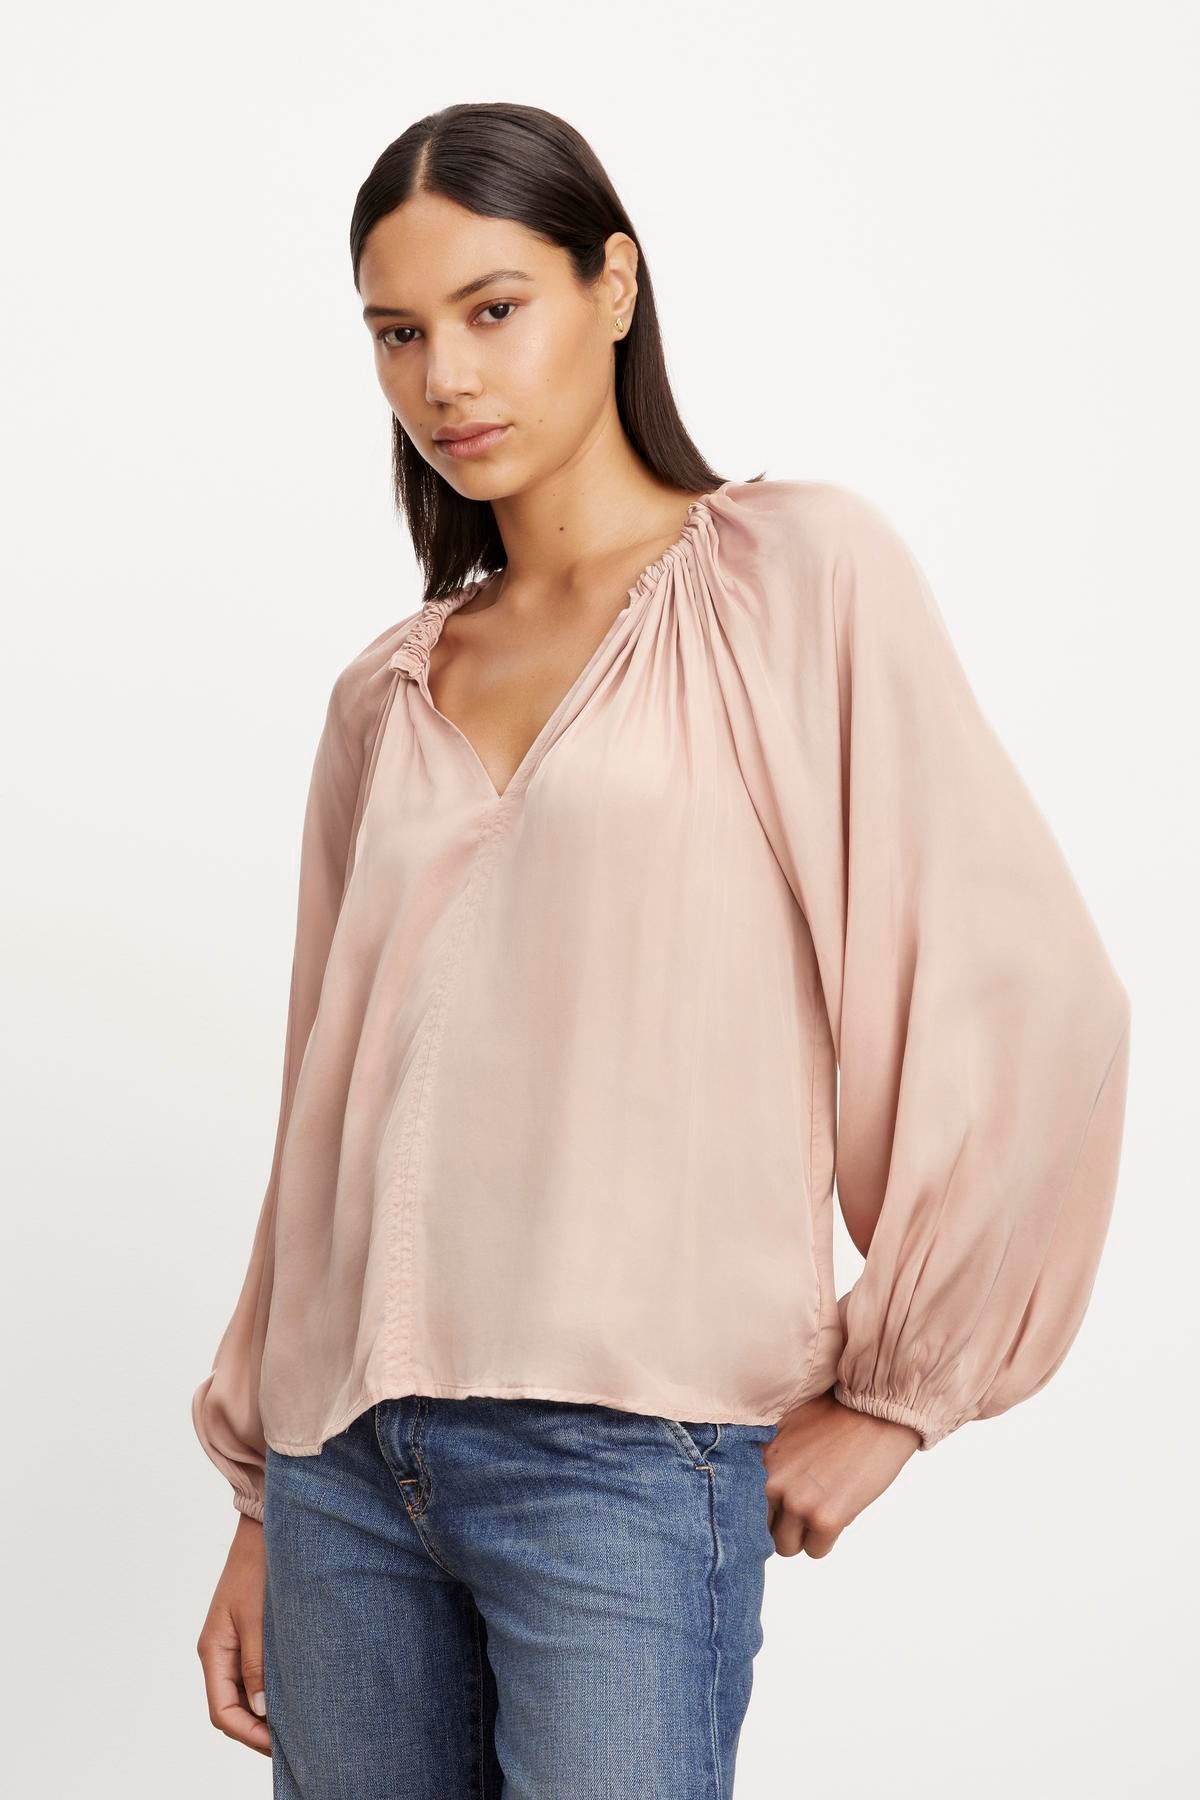   The model is wearing jeans and a NORIA SATIN PEASANT TOP by Velvet by Graham & Spencer, which has a relaxed fit and features a v-neckline. 